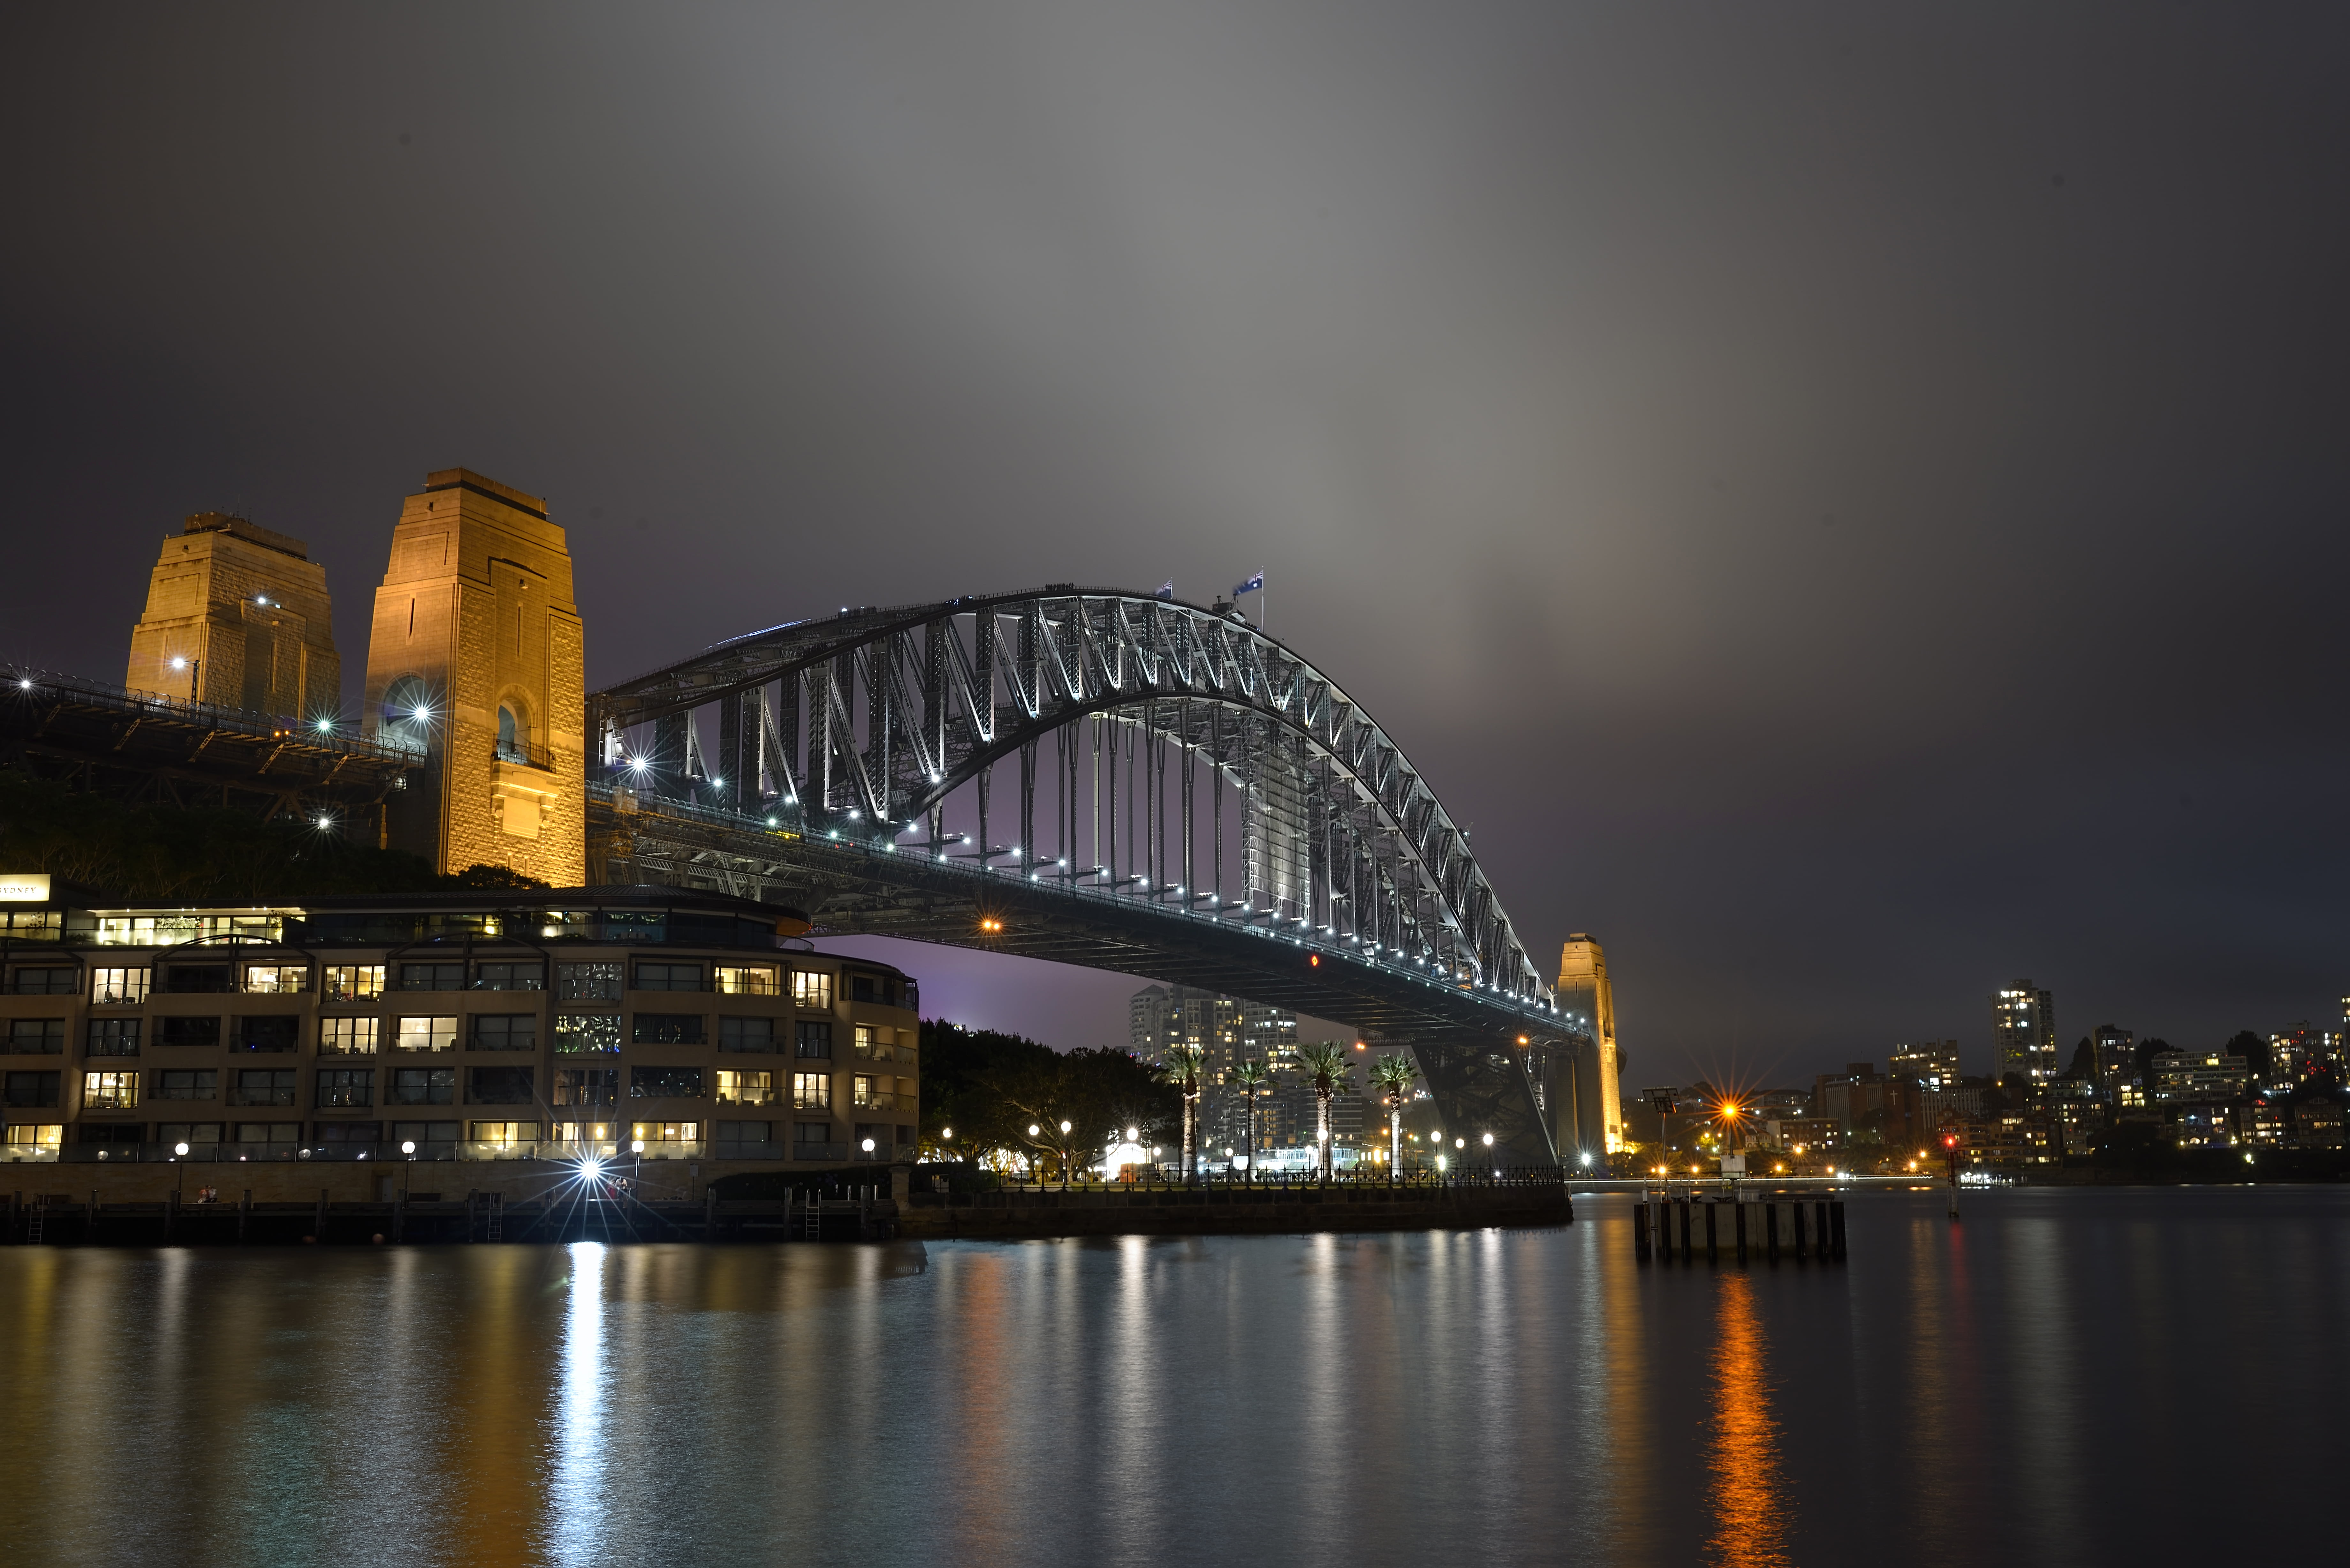 city view photo during night time, sydney harbour bridge, australia, sydney harbour bridge, australia